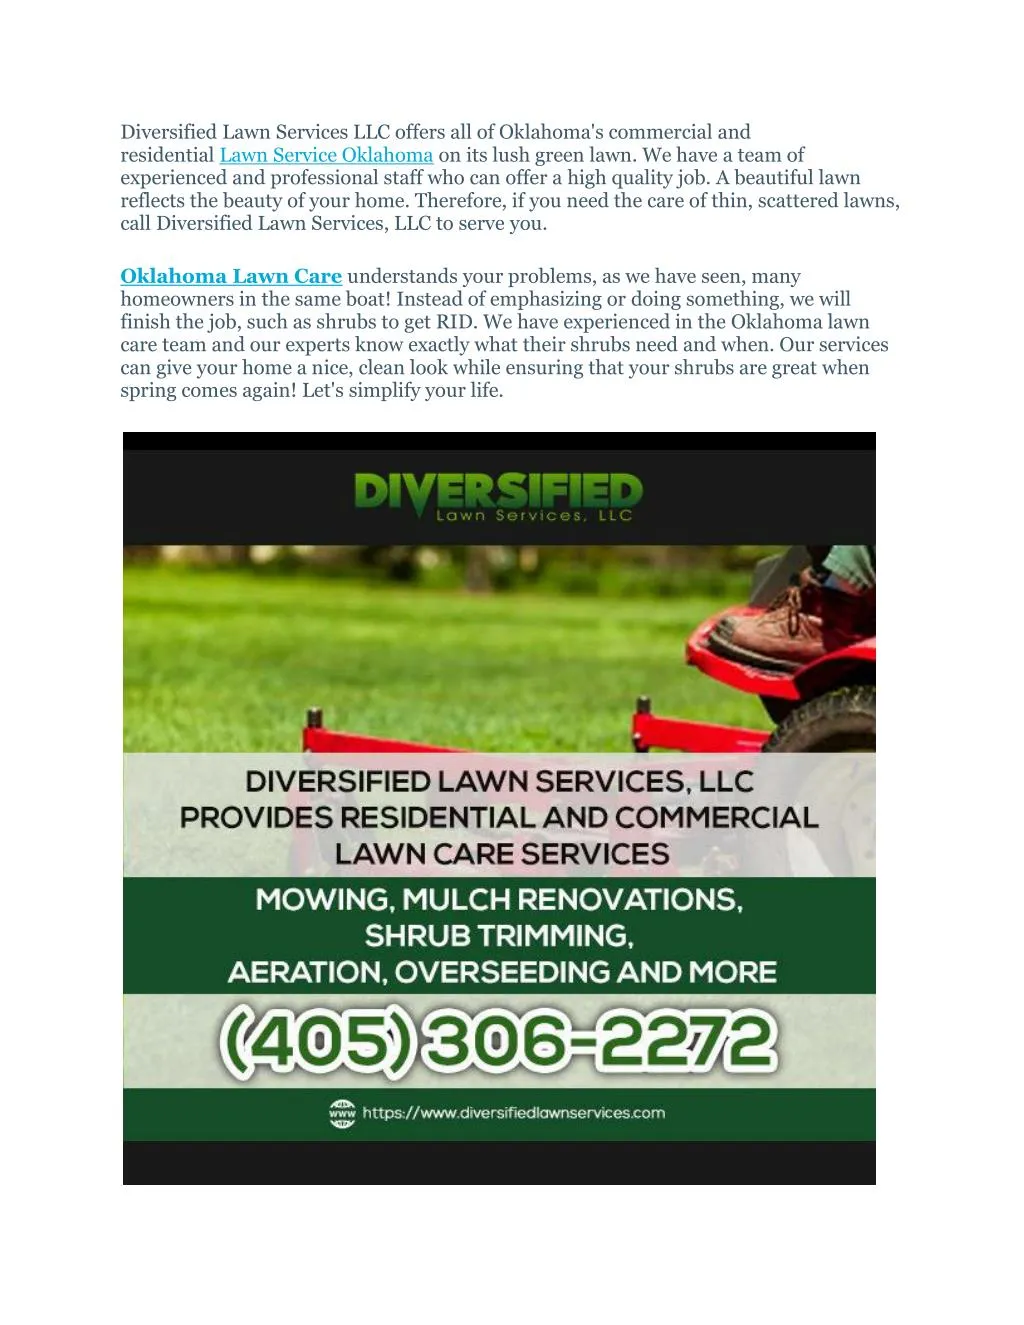 diversified lawn services llc offers